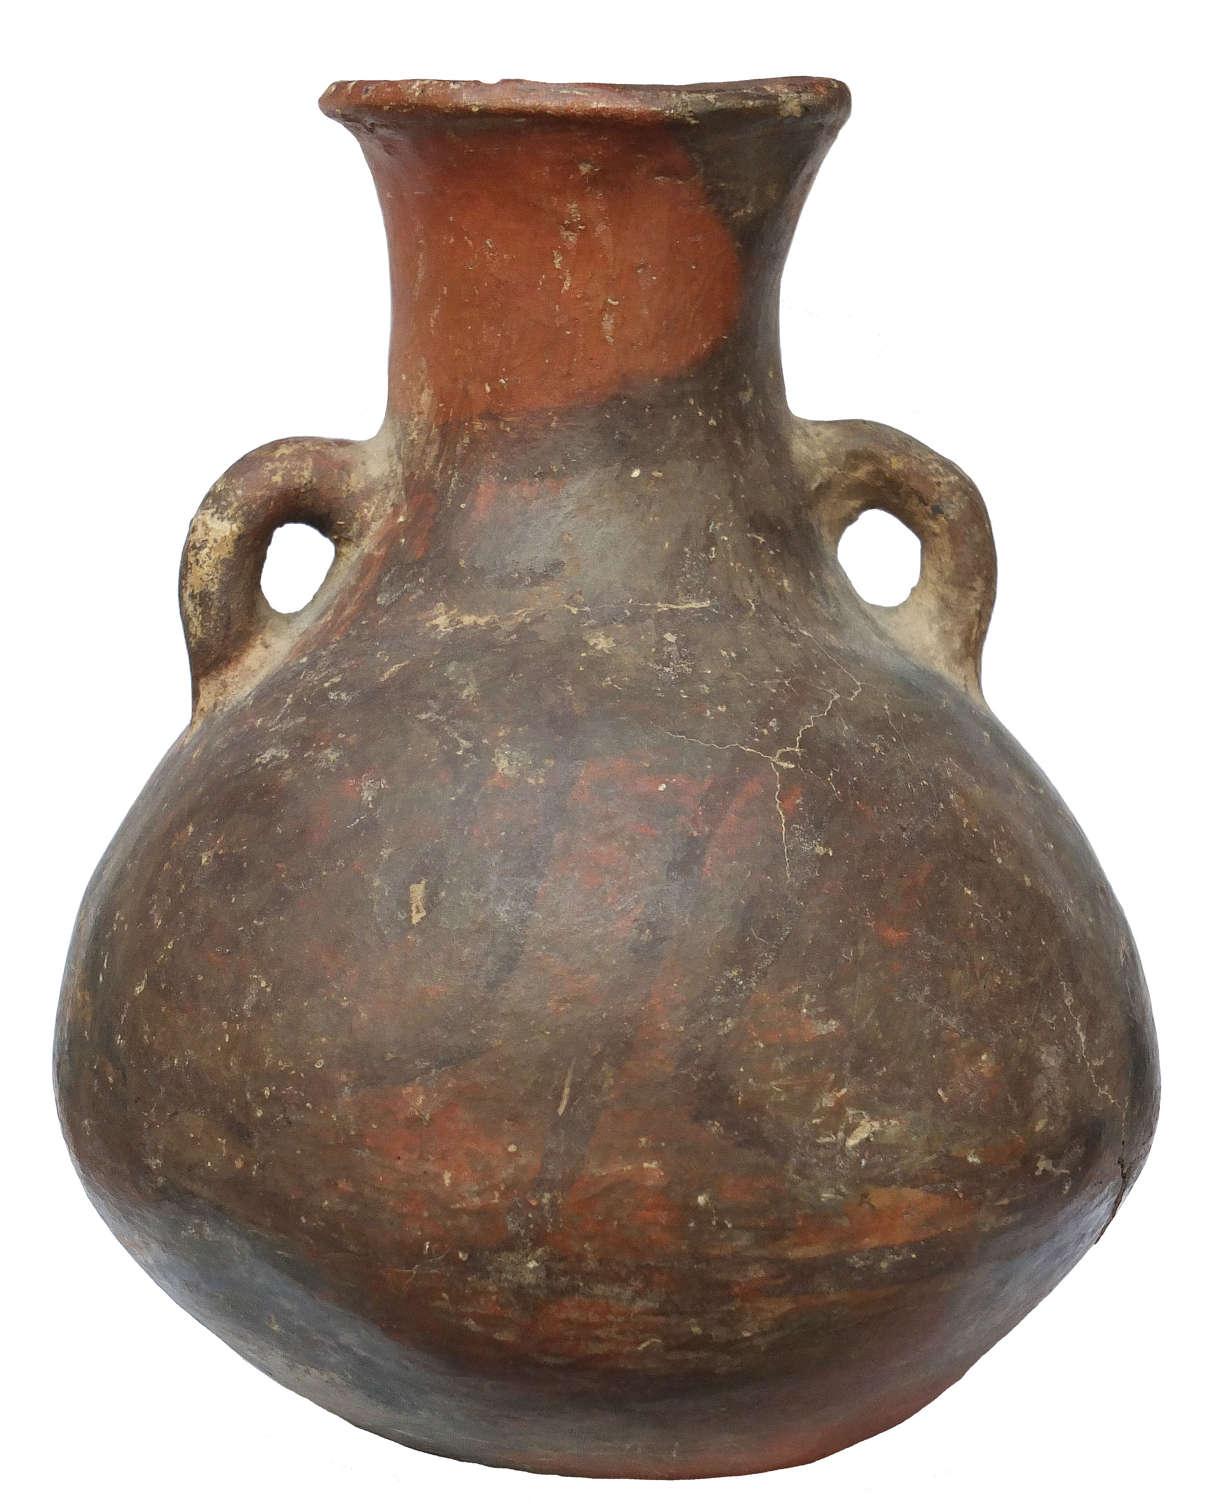 A Bolivian twin-handled pottery amphora in debased Tiahuanaco style